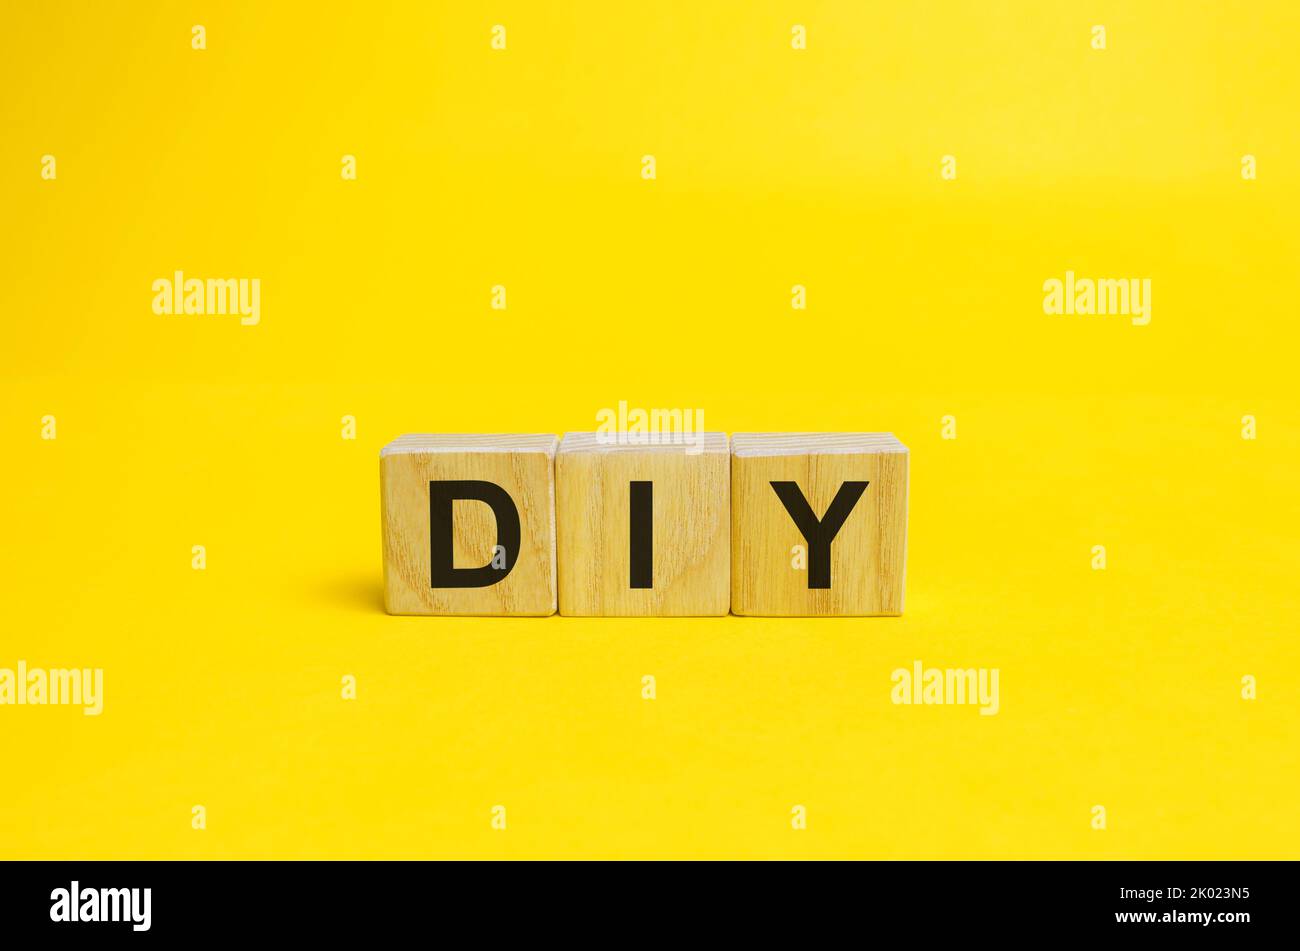 Wooden blocks with the word DIY - Do It Yourself concept. The method of self-creation of things without the help of professionals. yellow background Stock Photo